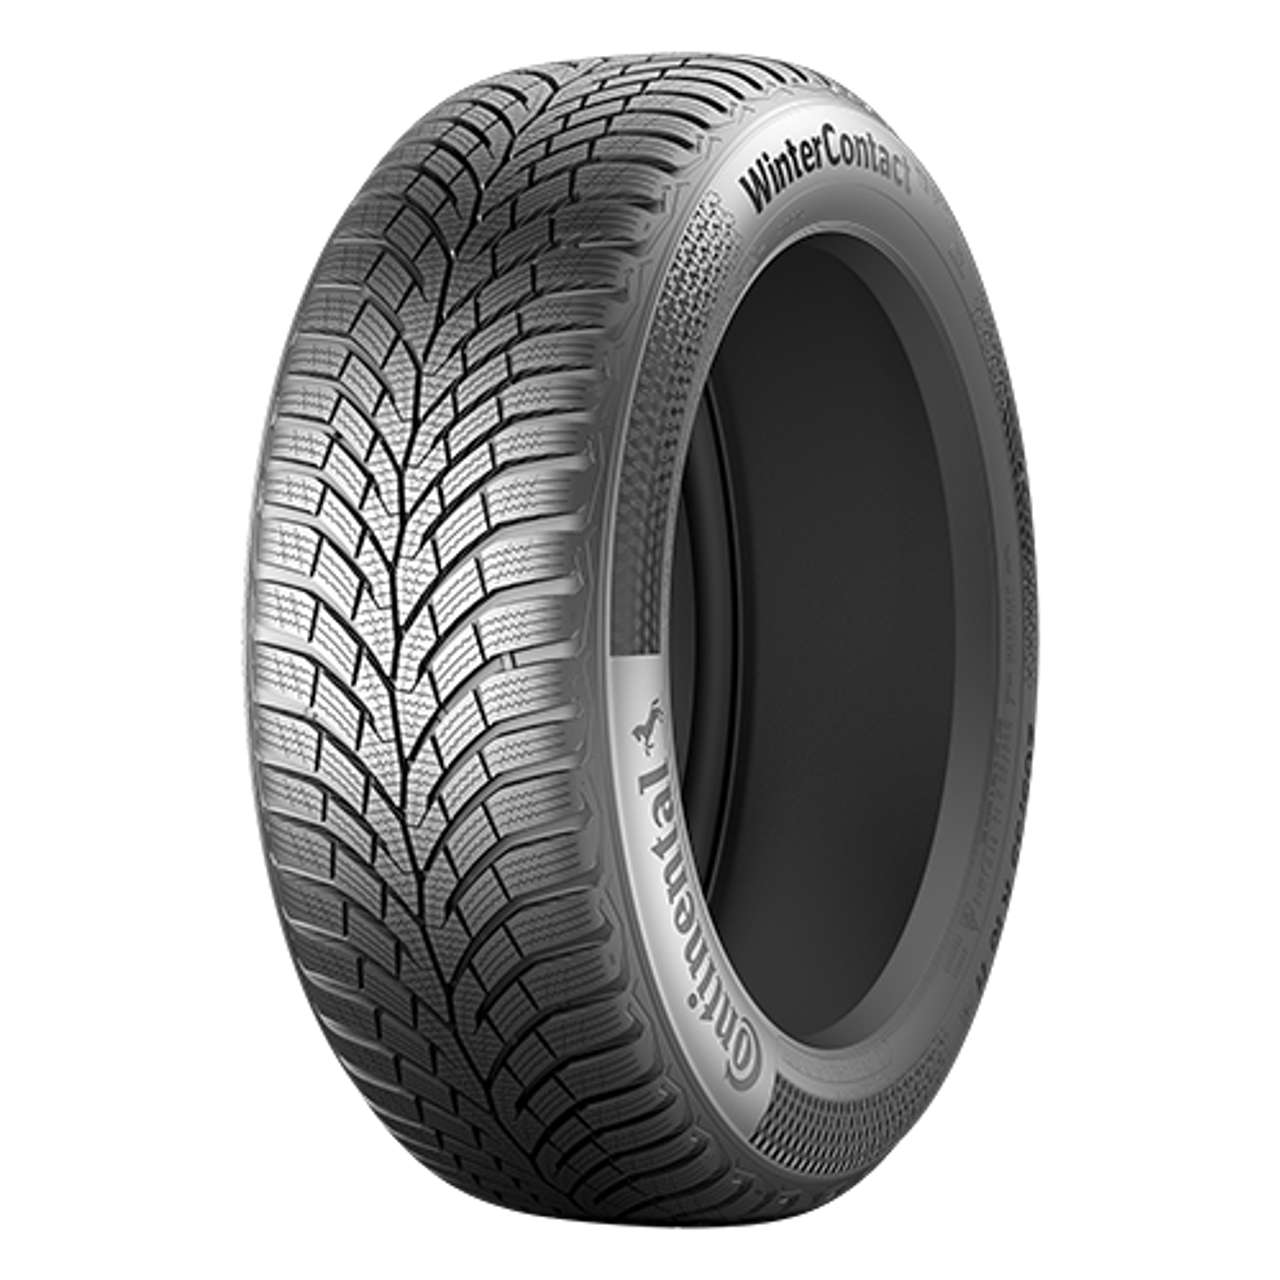 CONTINENTAL WINTERCONTACT TS 870 175/70R14 88T BSW von Continental